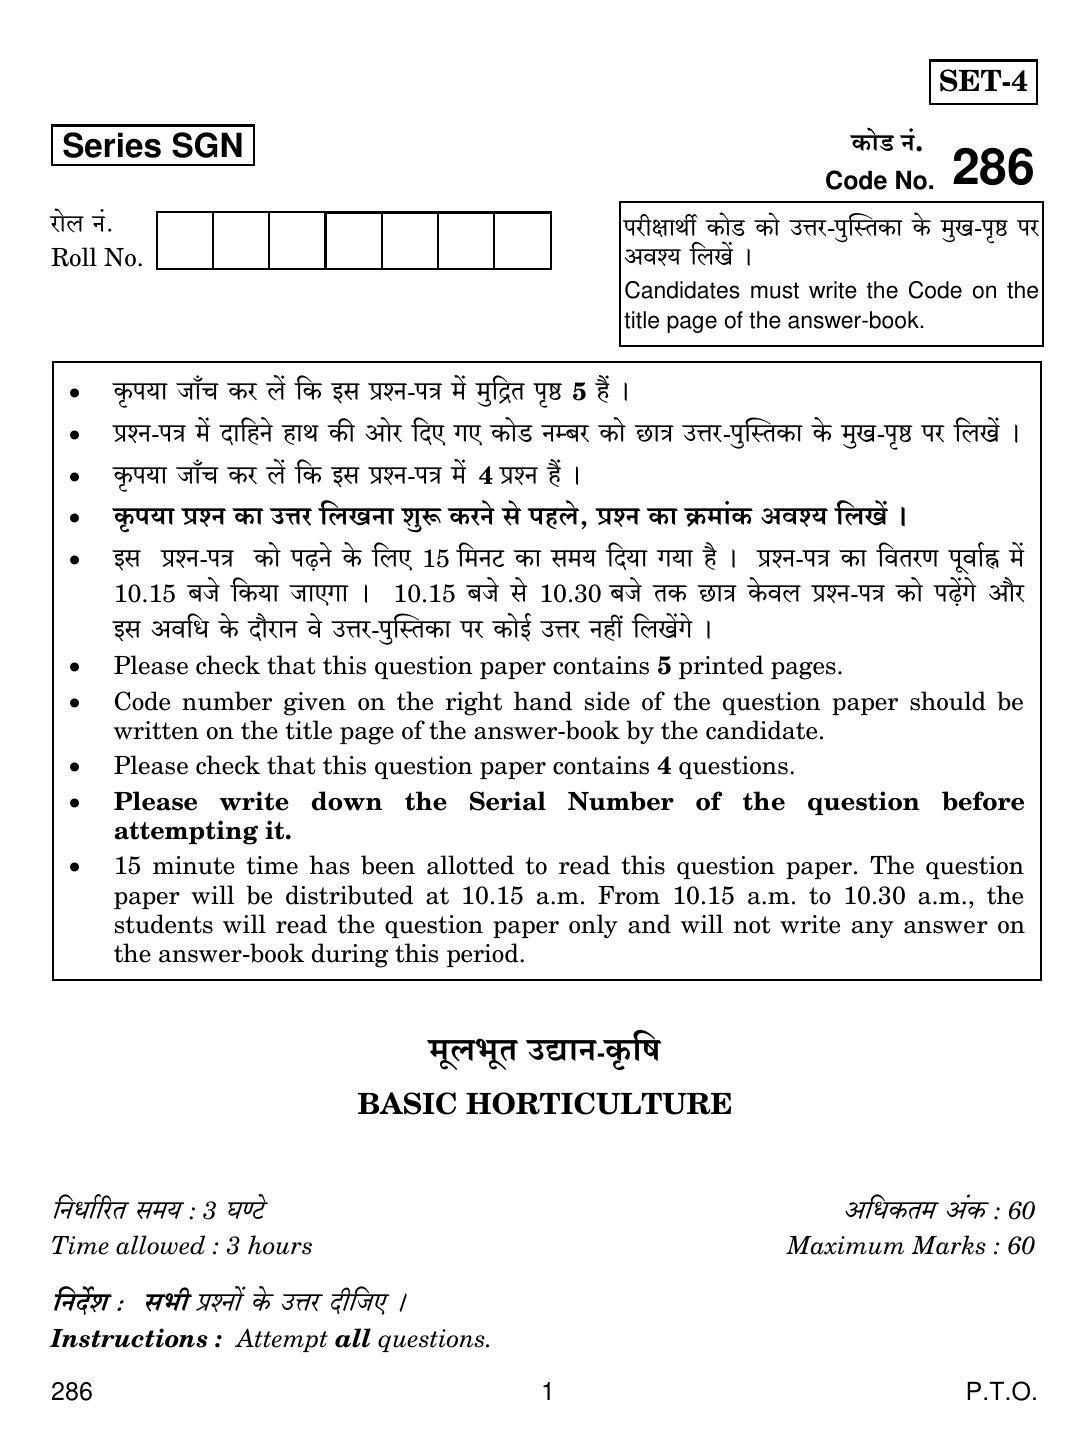 CBSE Class 12 286 BASIC HORTICULTURE 2018 Question Paper - Page 1